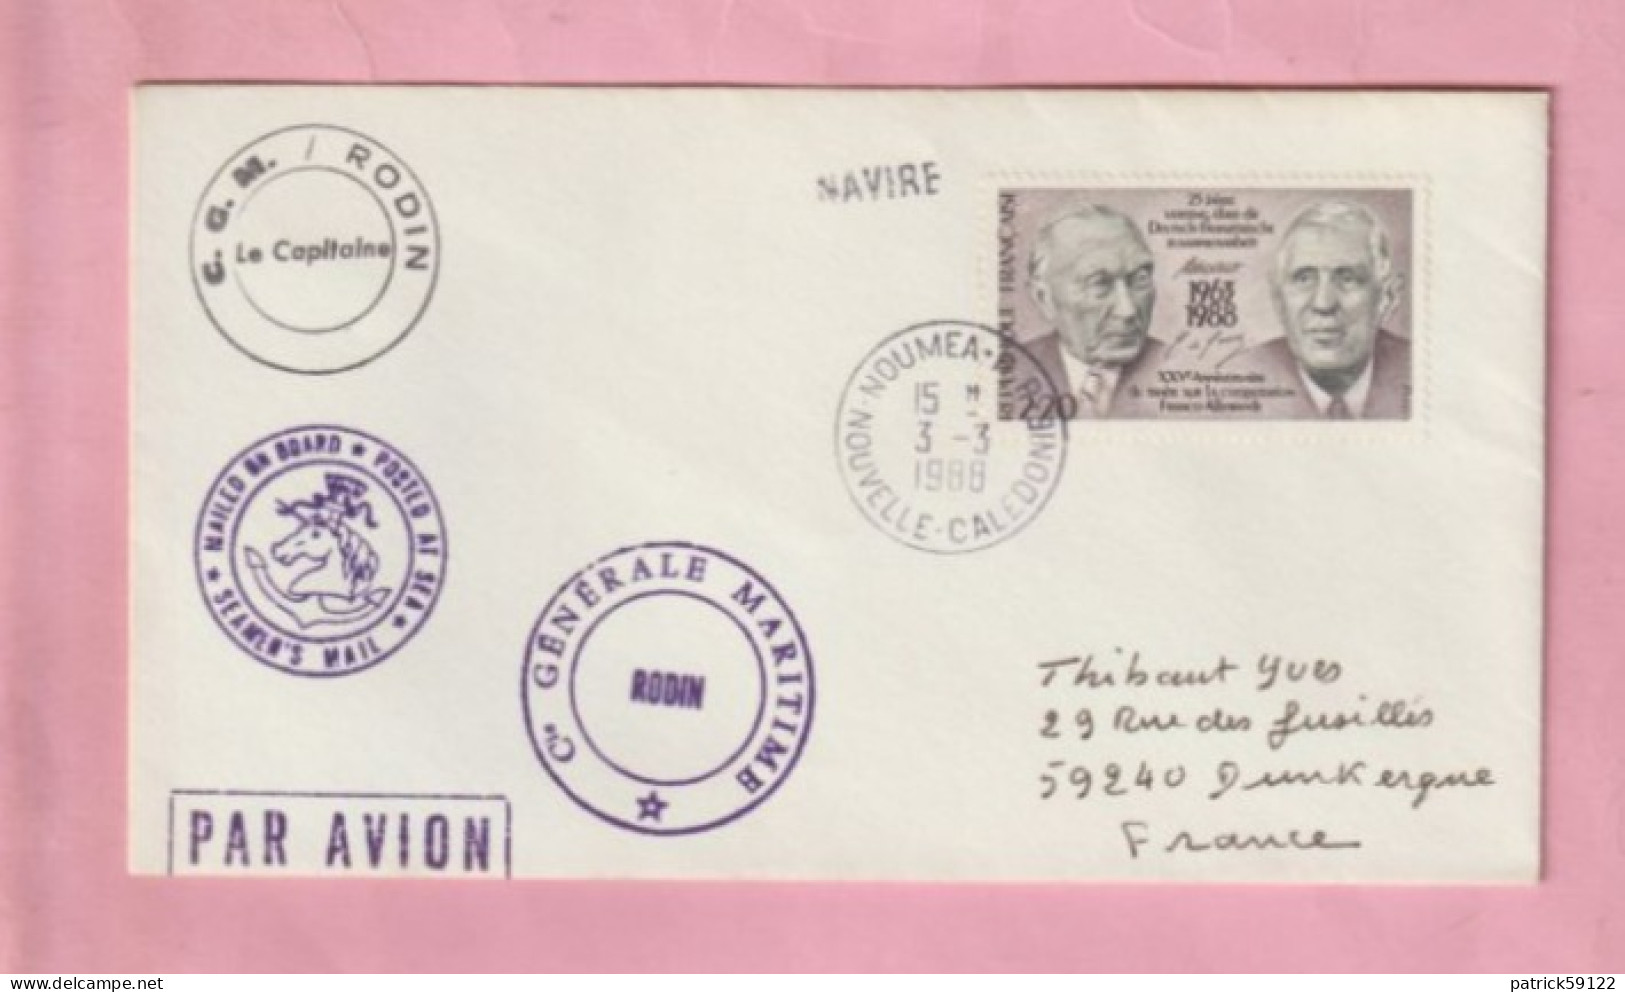 ENVELOPPE POSTED AT SEA   - C G M / COMPAGNIE GENERALE MARITIME RODIN - NOUMEA  - 1988 - Lettres & Documents